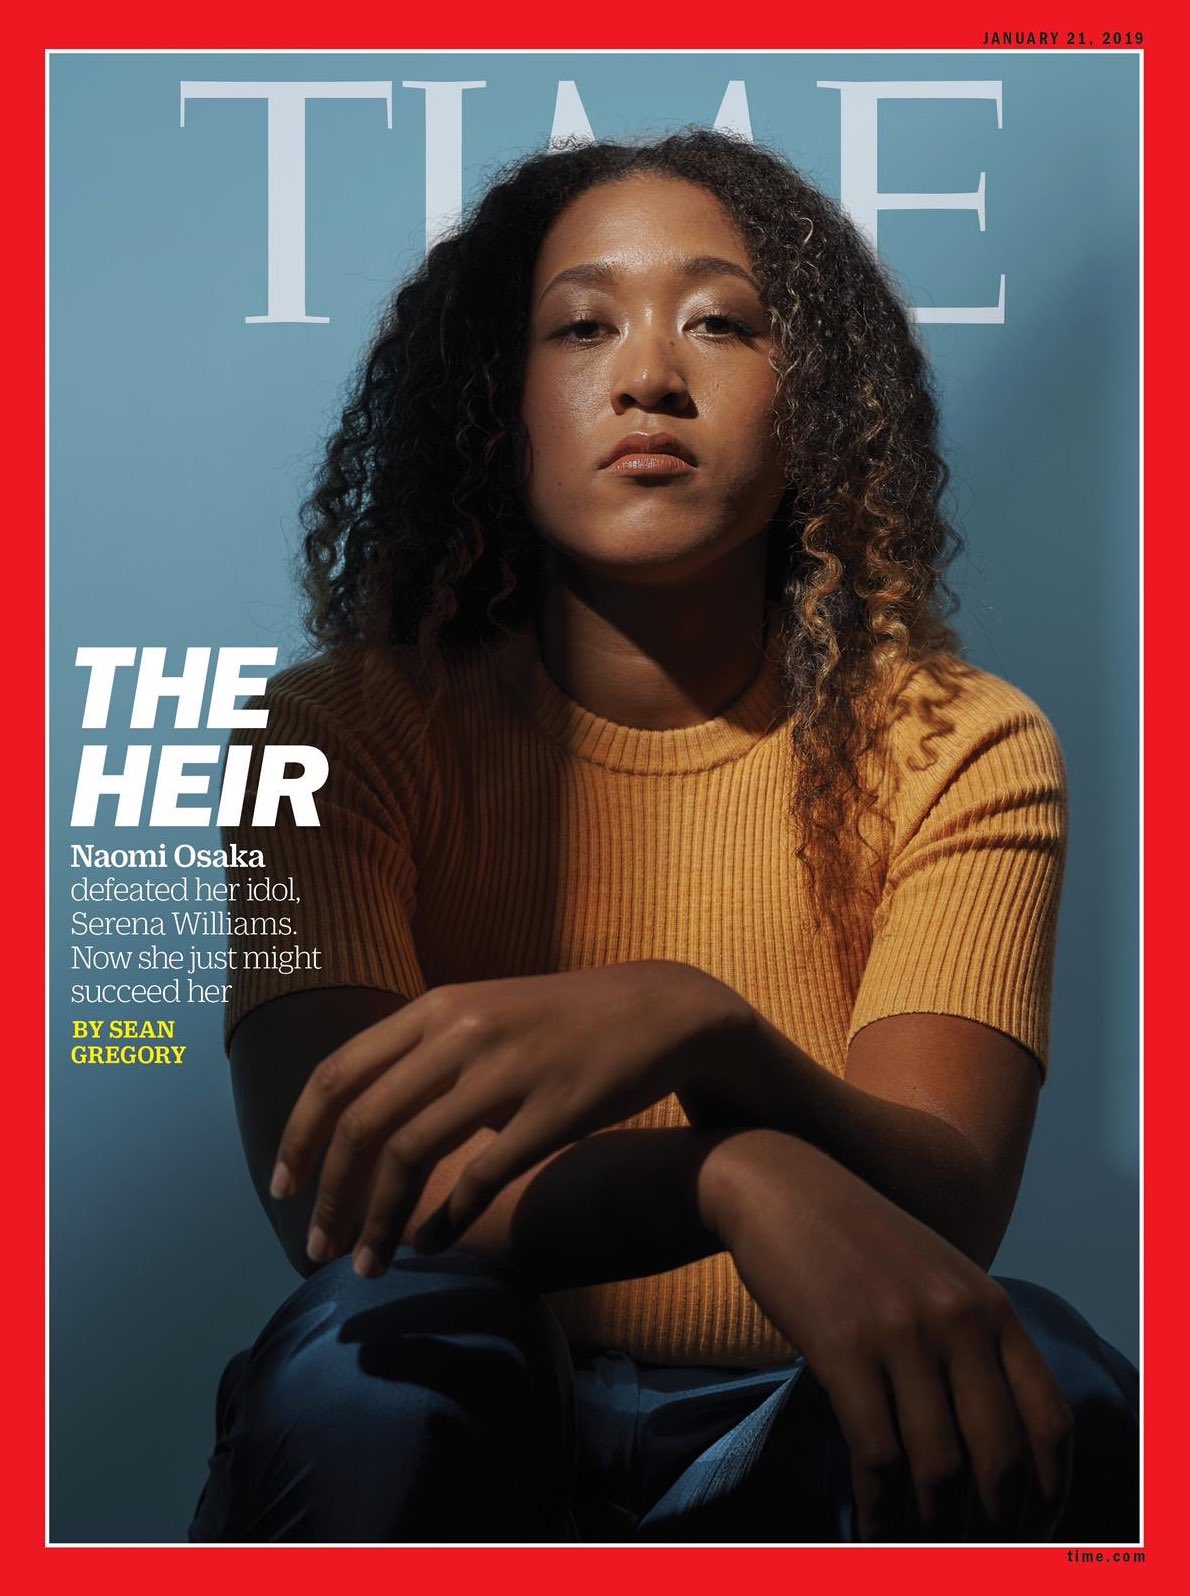 Naomi Osaka in a sweater, looking actually kind of stern at the camera